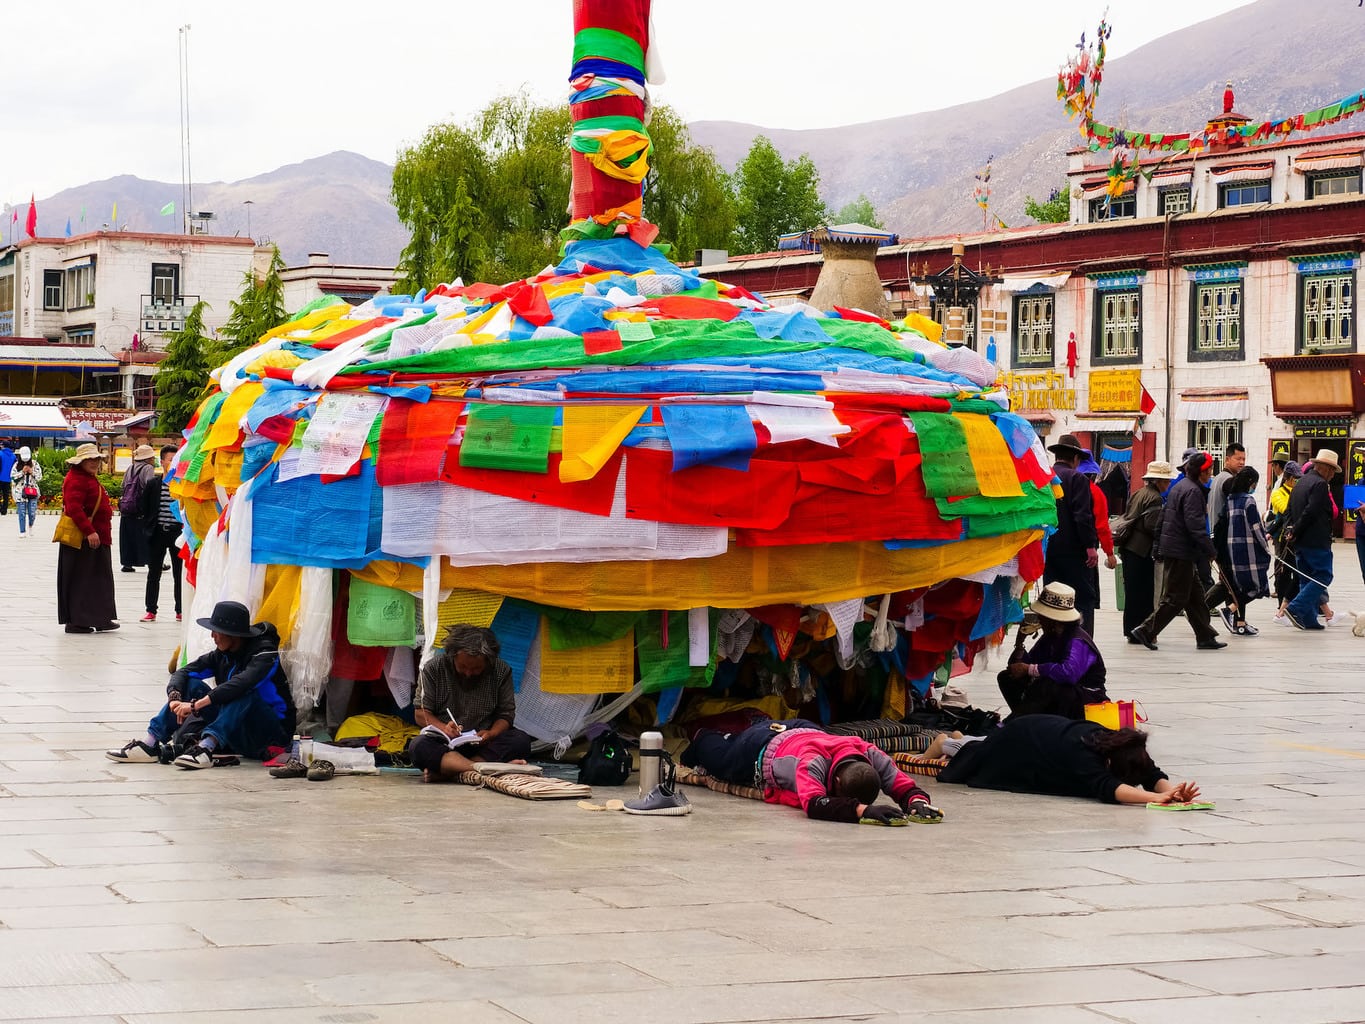 Postrations at Jokhang temple square